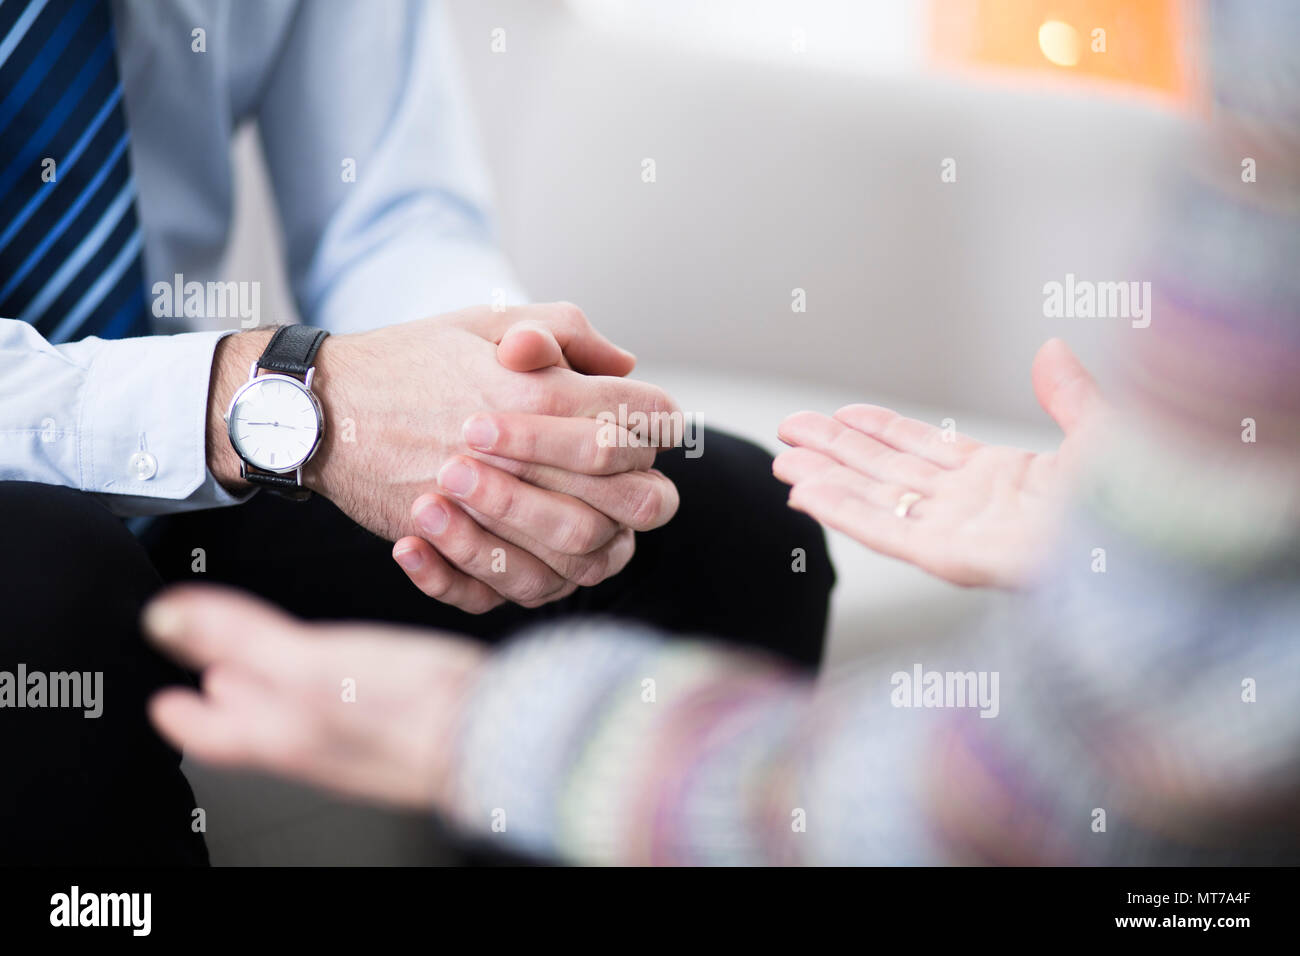 Close-up of male hands with an elegant watch and his female therapist's hands Stock Photo